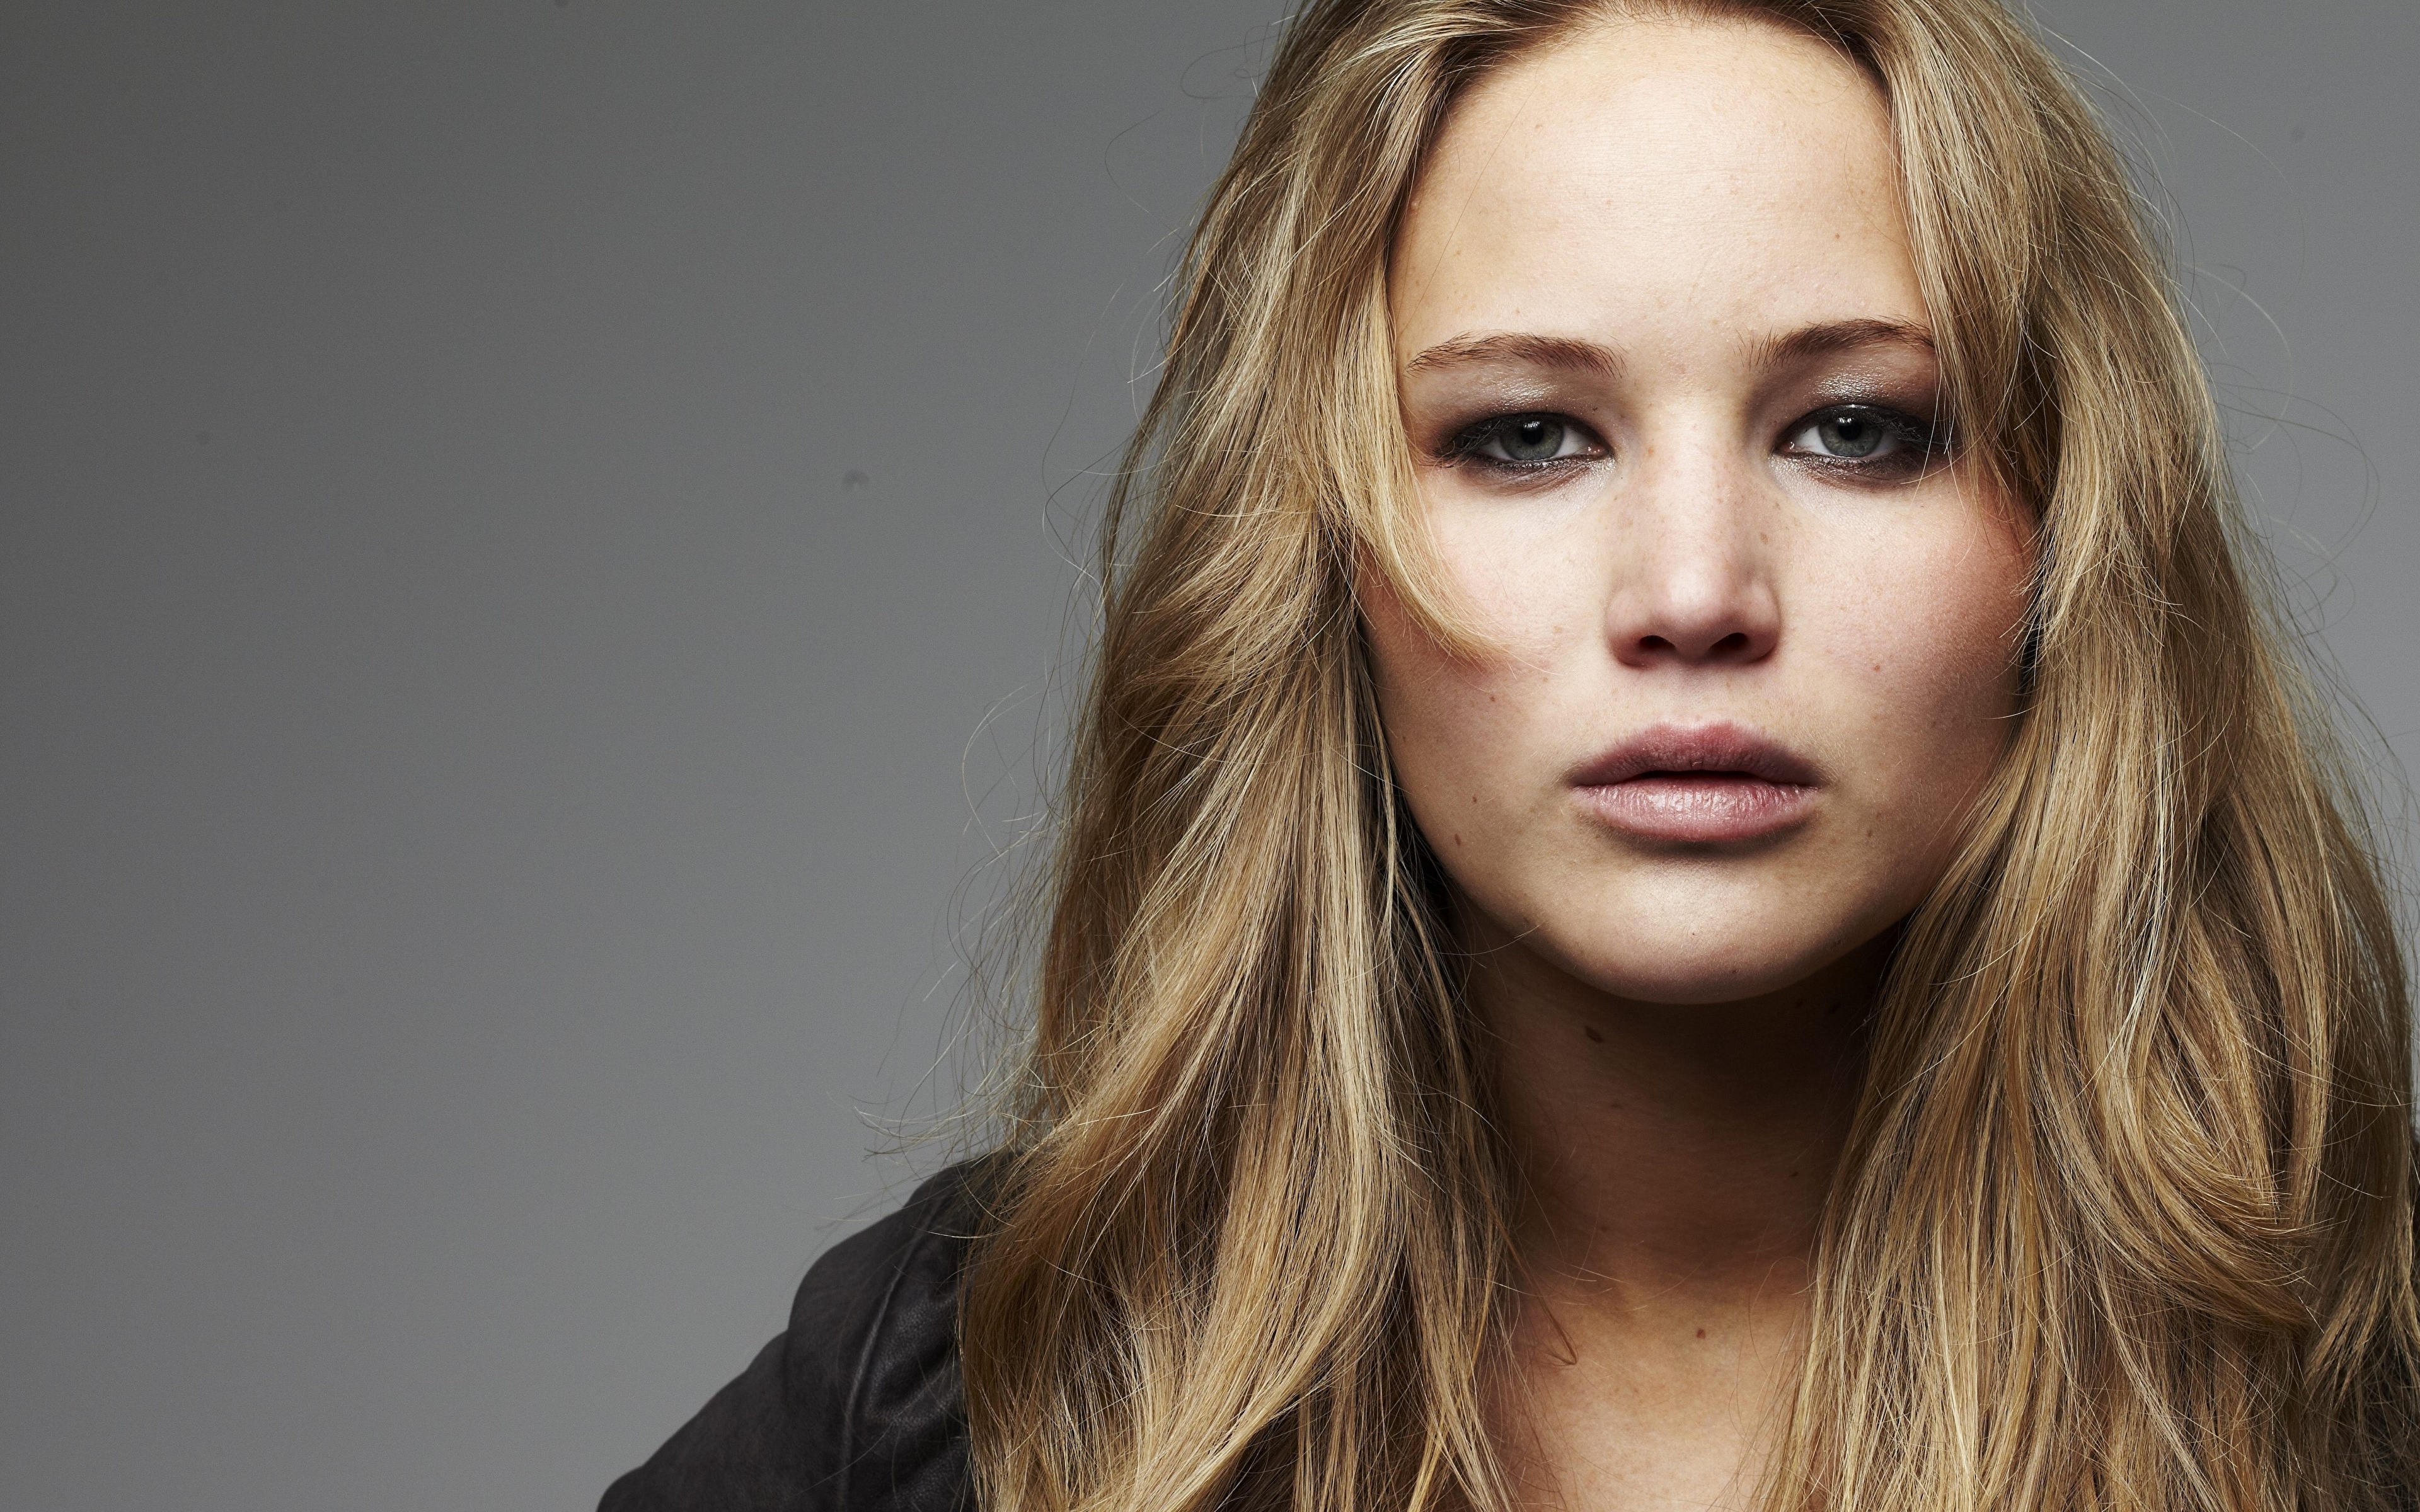 Image Jennifer Lawrence Dark Blonde Hair Face Young Woman 3840x2400